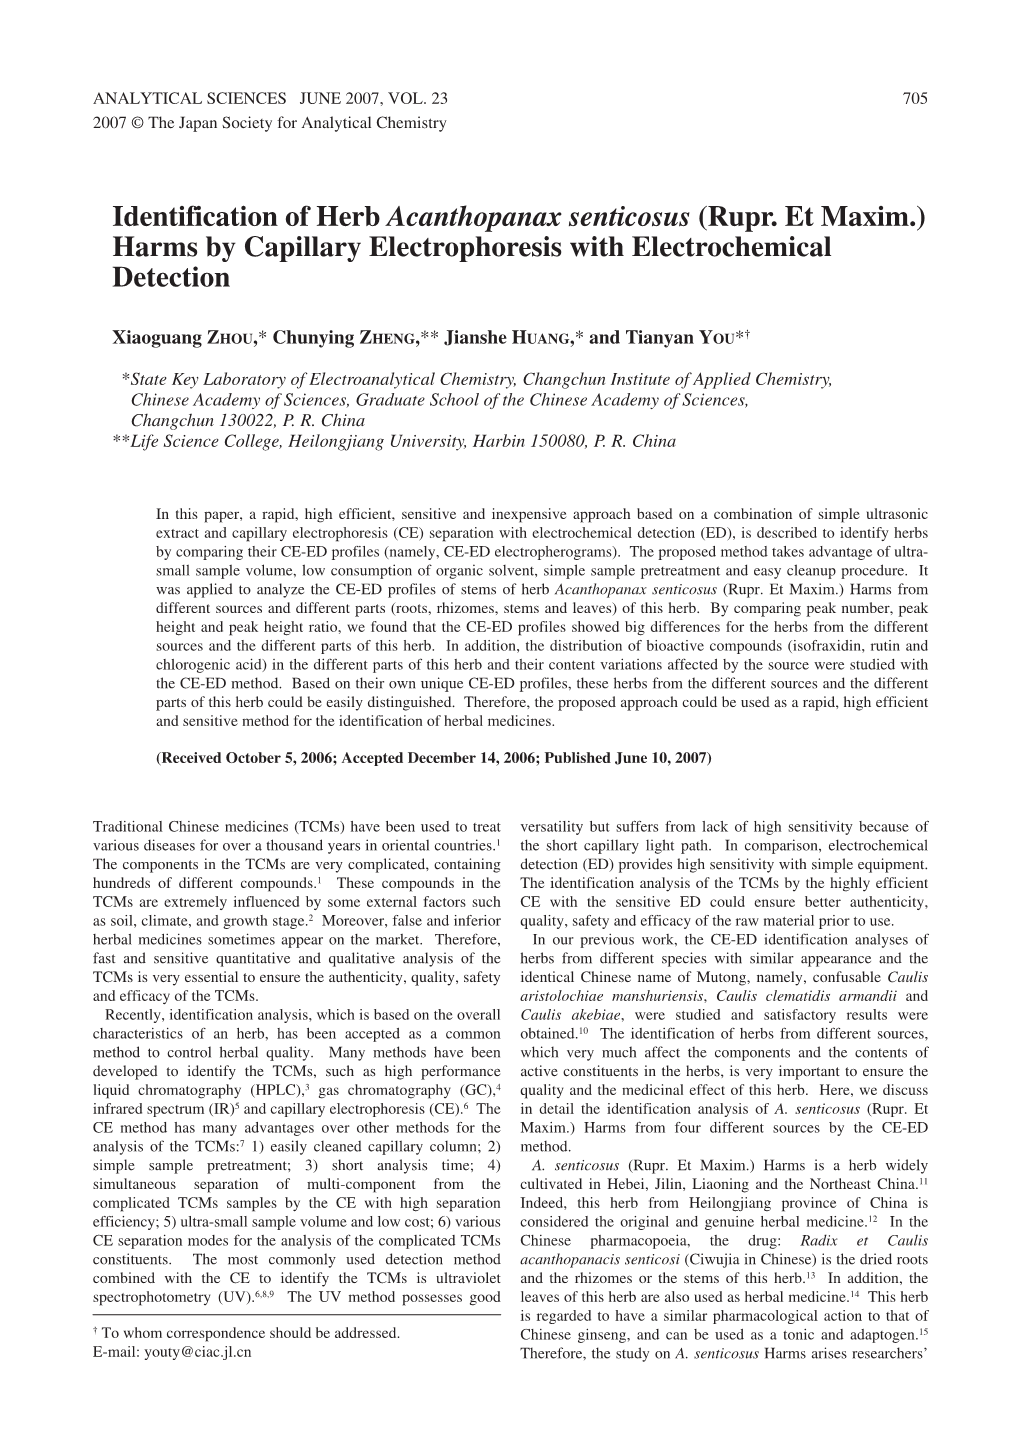 Identification of Herb Acanthopanax Senticosus (Rupr. Et Maxim.) Harms by Capillary Electrophoresis with Electrochemical Detection